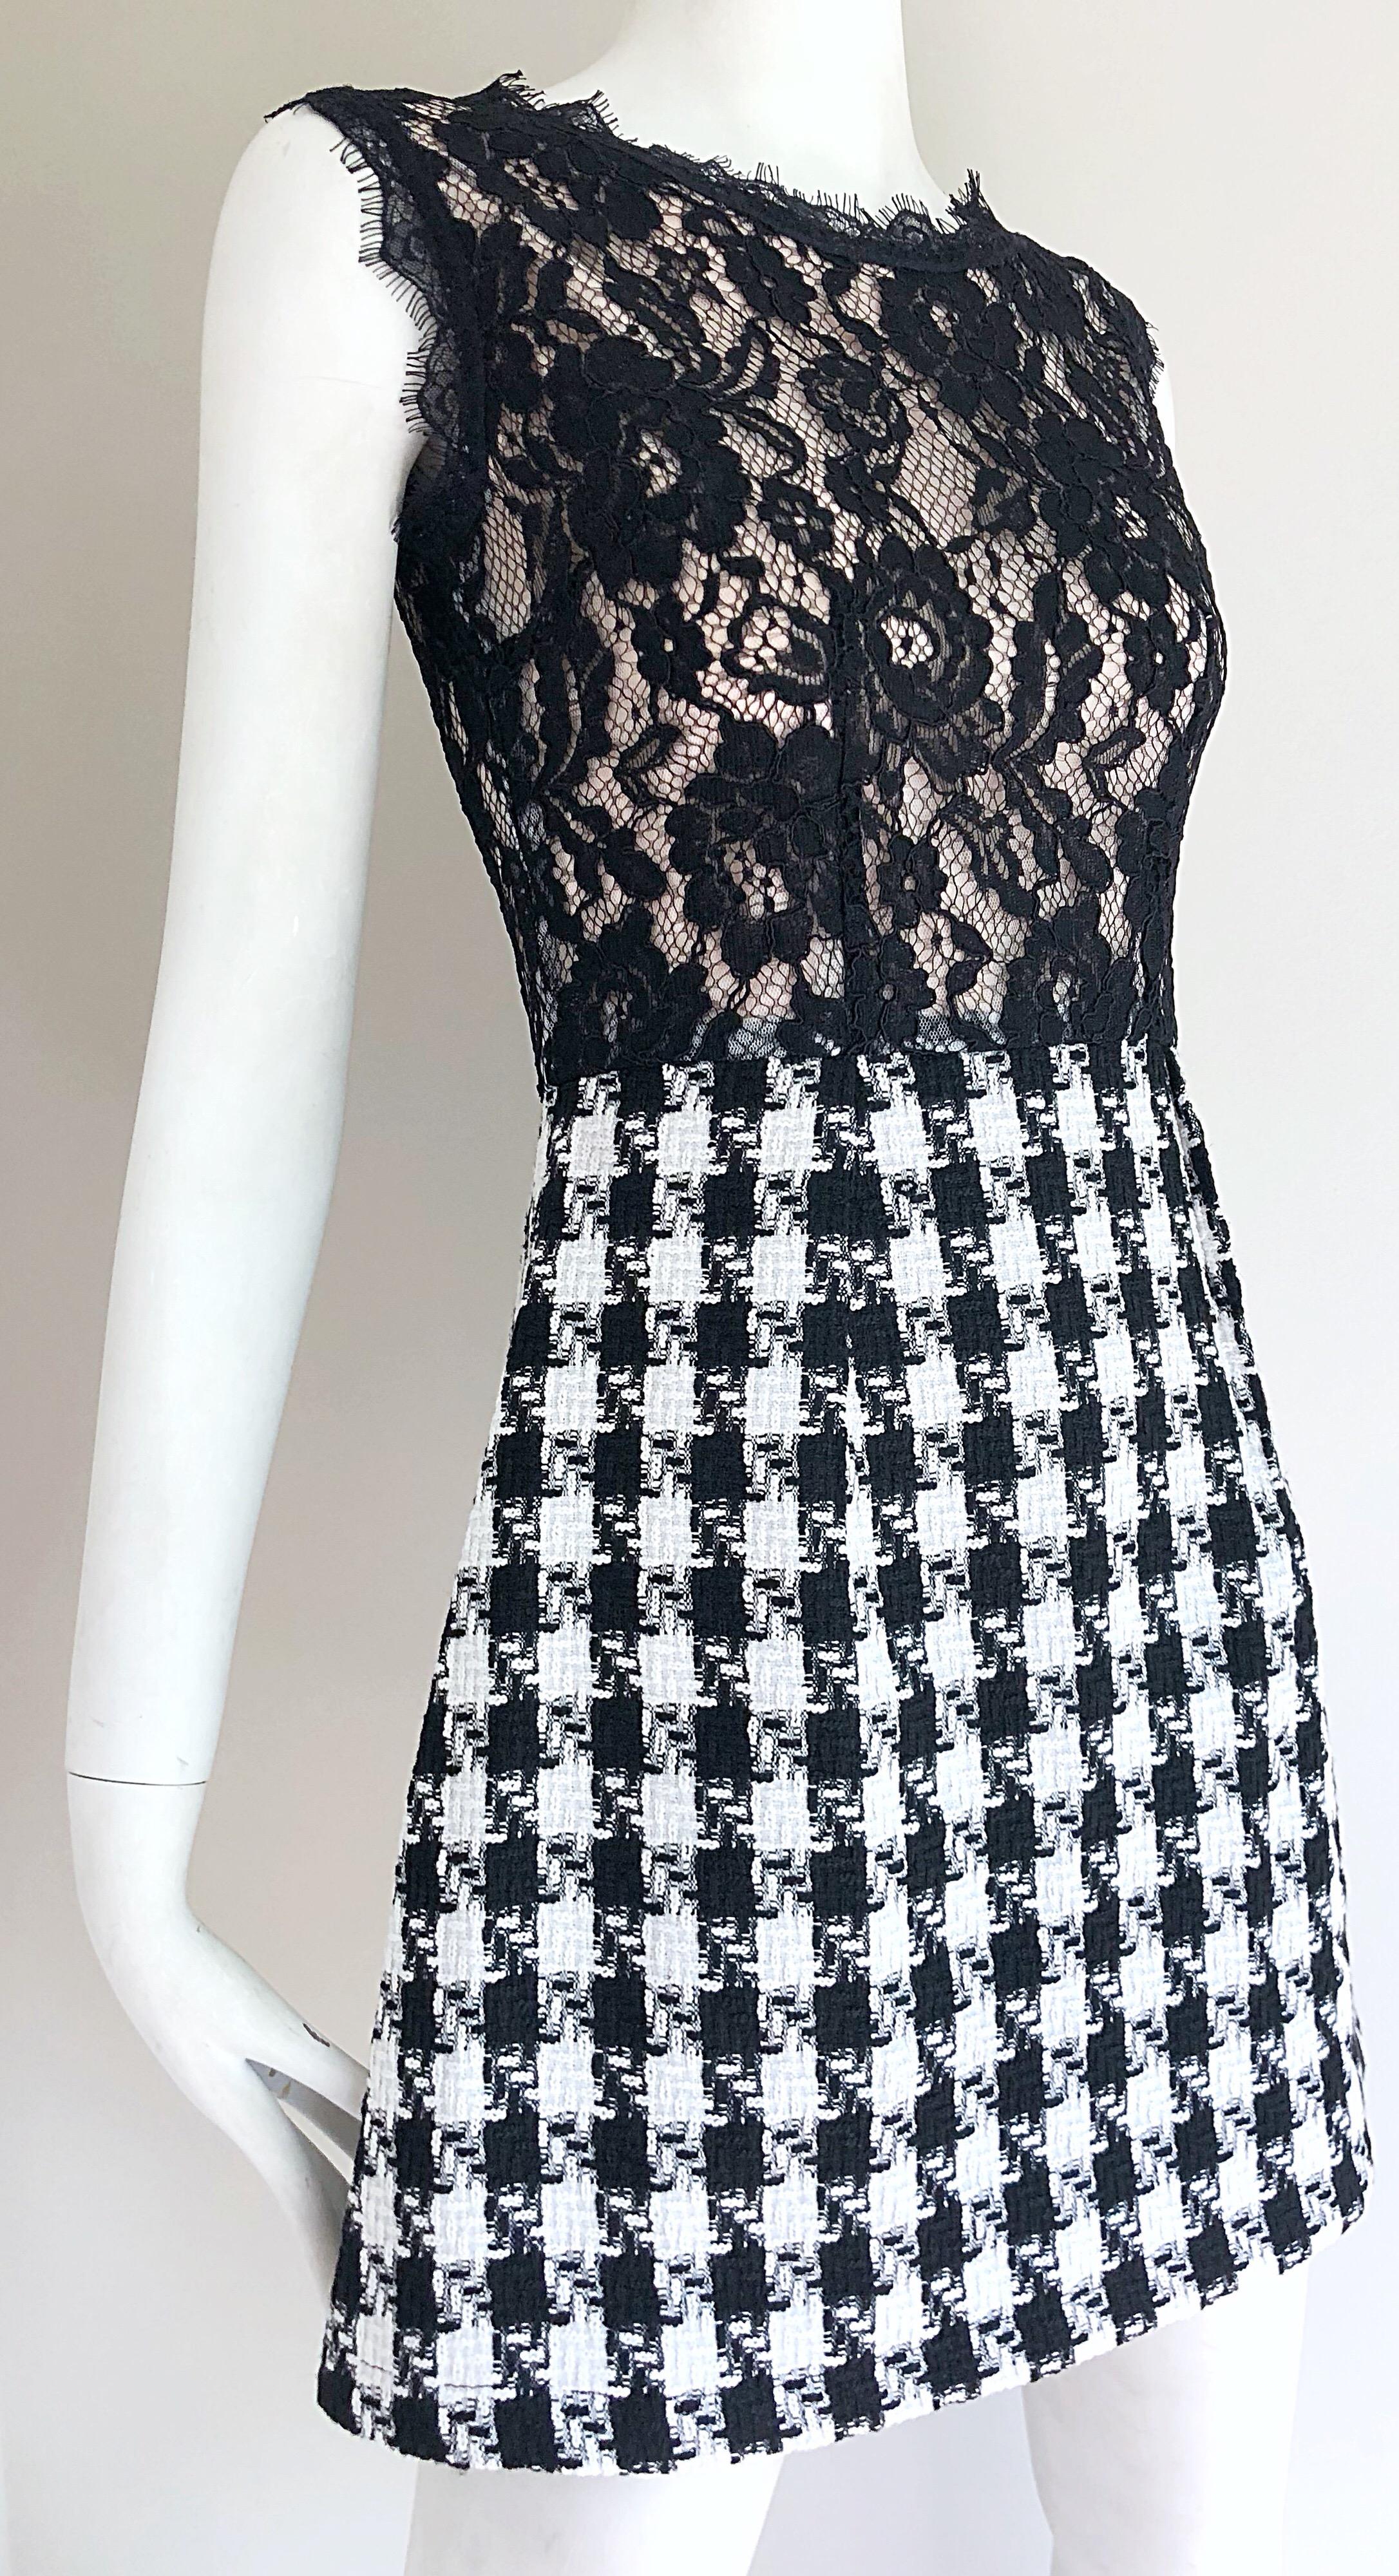 Marc Jacobs Early 2000s Black and White Lace Houndstooth Checkered Mini Dress In Excellent Condition For Sale In San Diego, CA